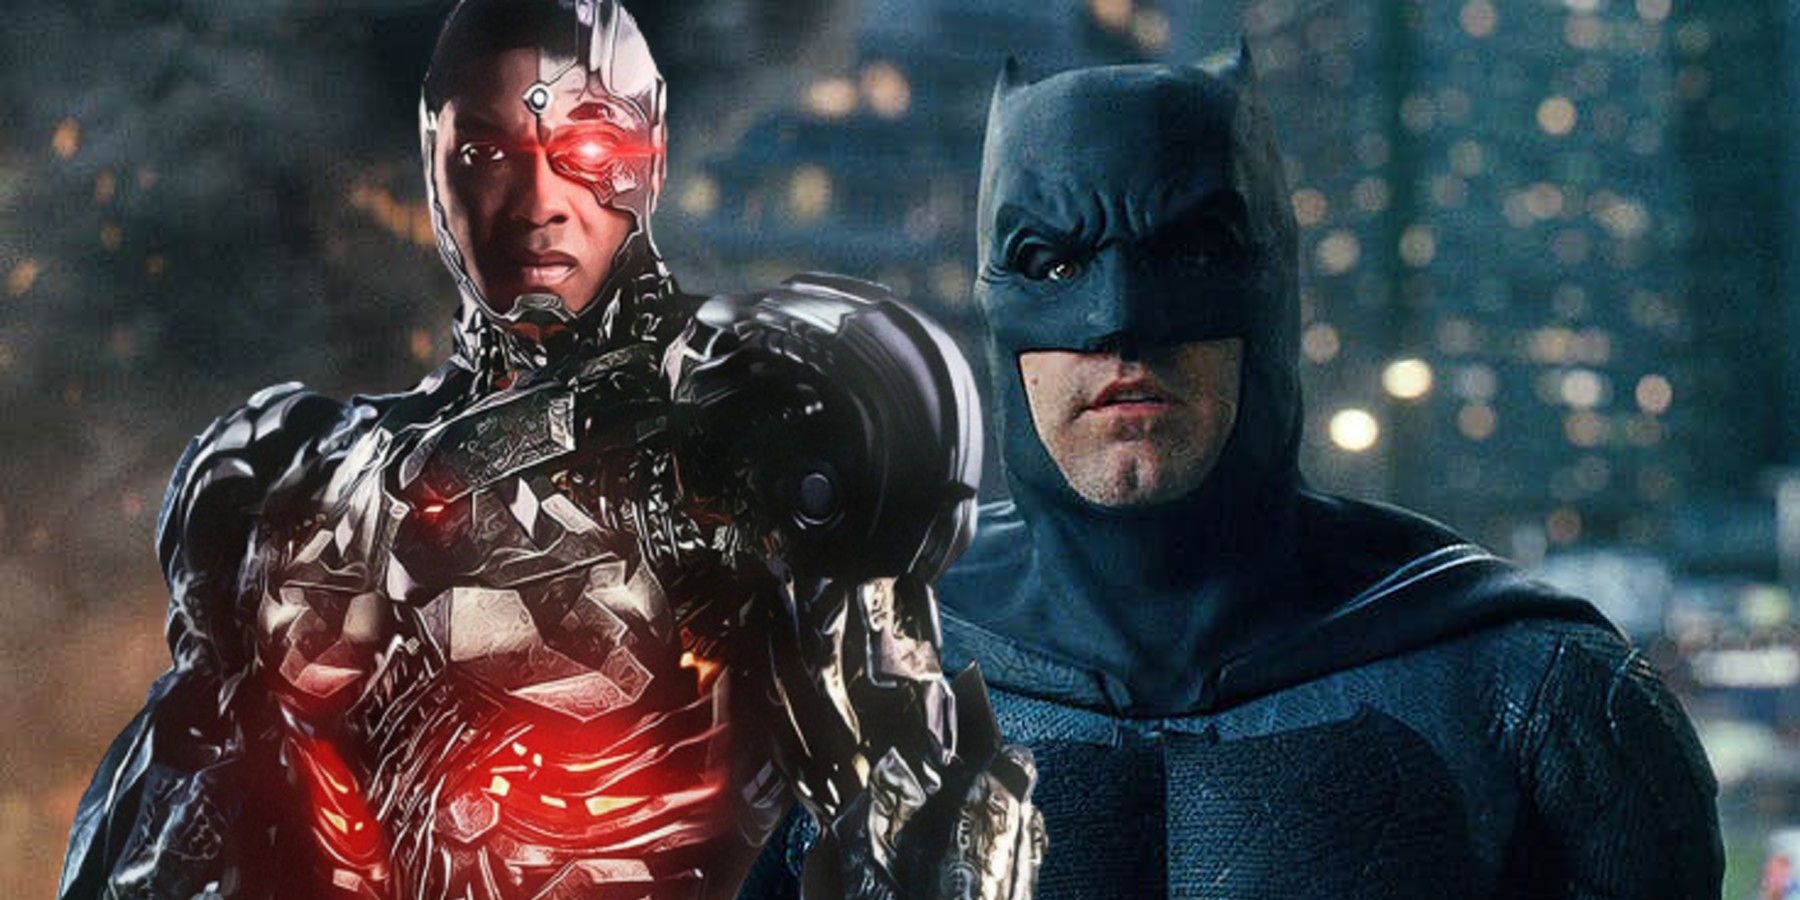 Ray Fisher and Ben Affleck Justice League reshoots